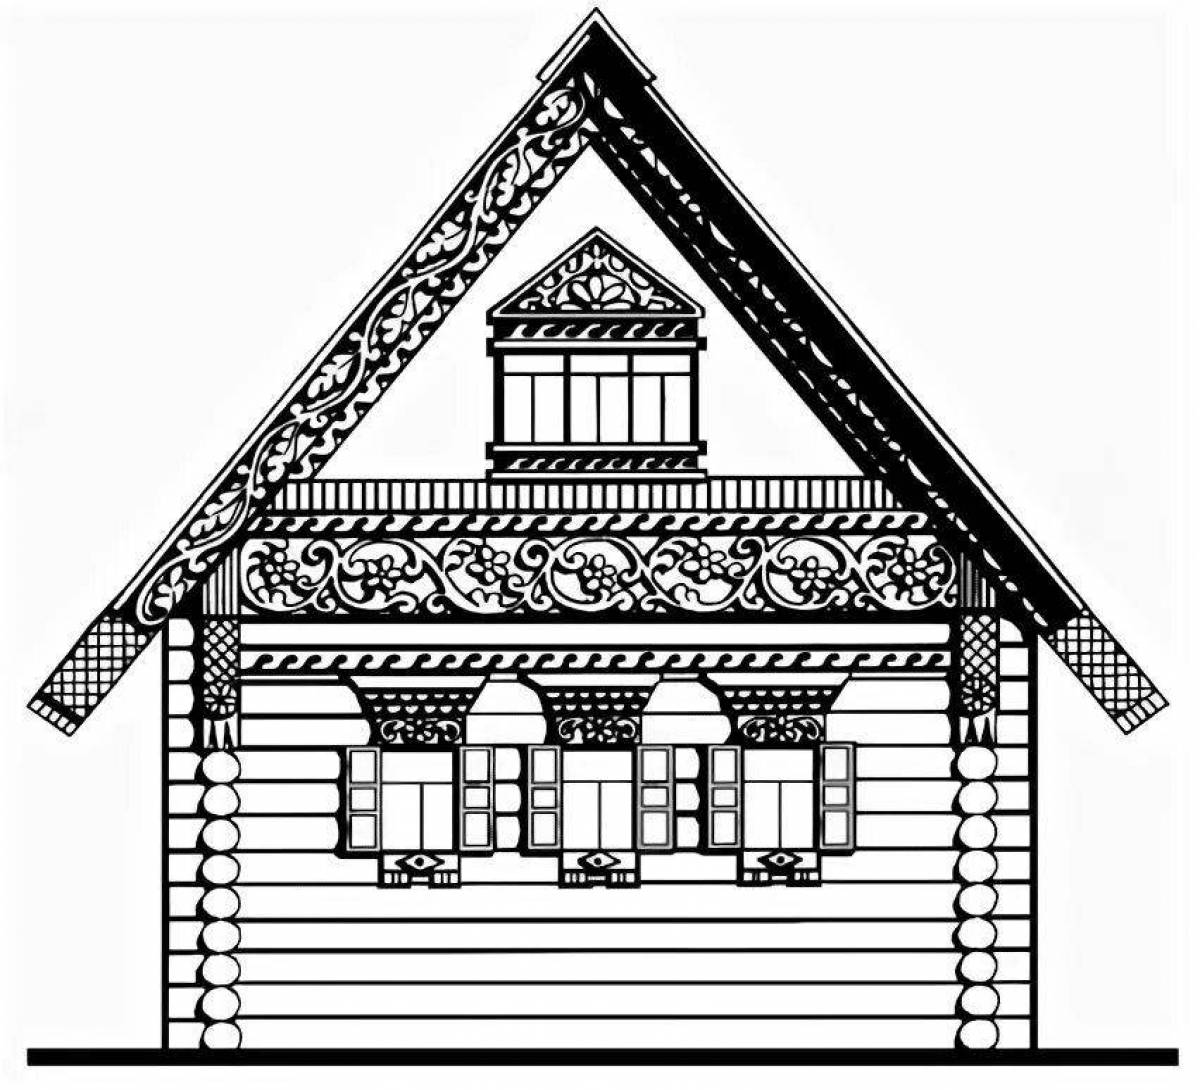 Coloring page cute russian hut